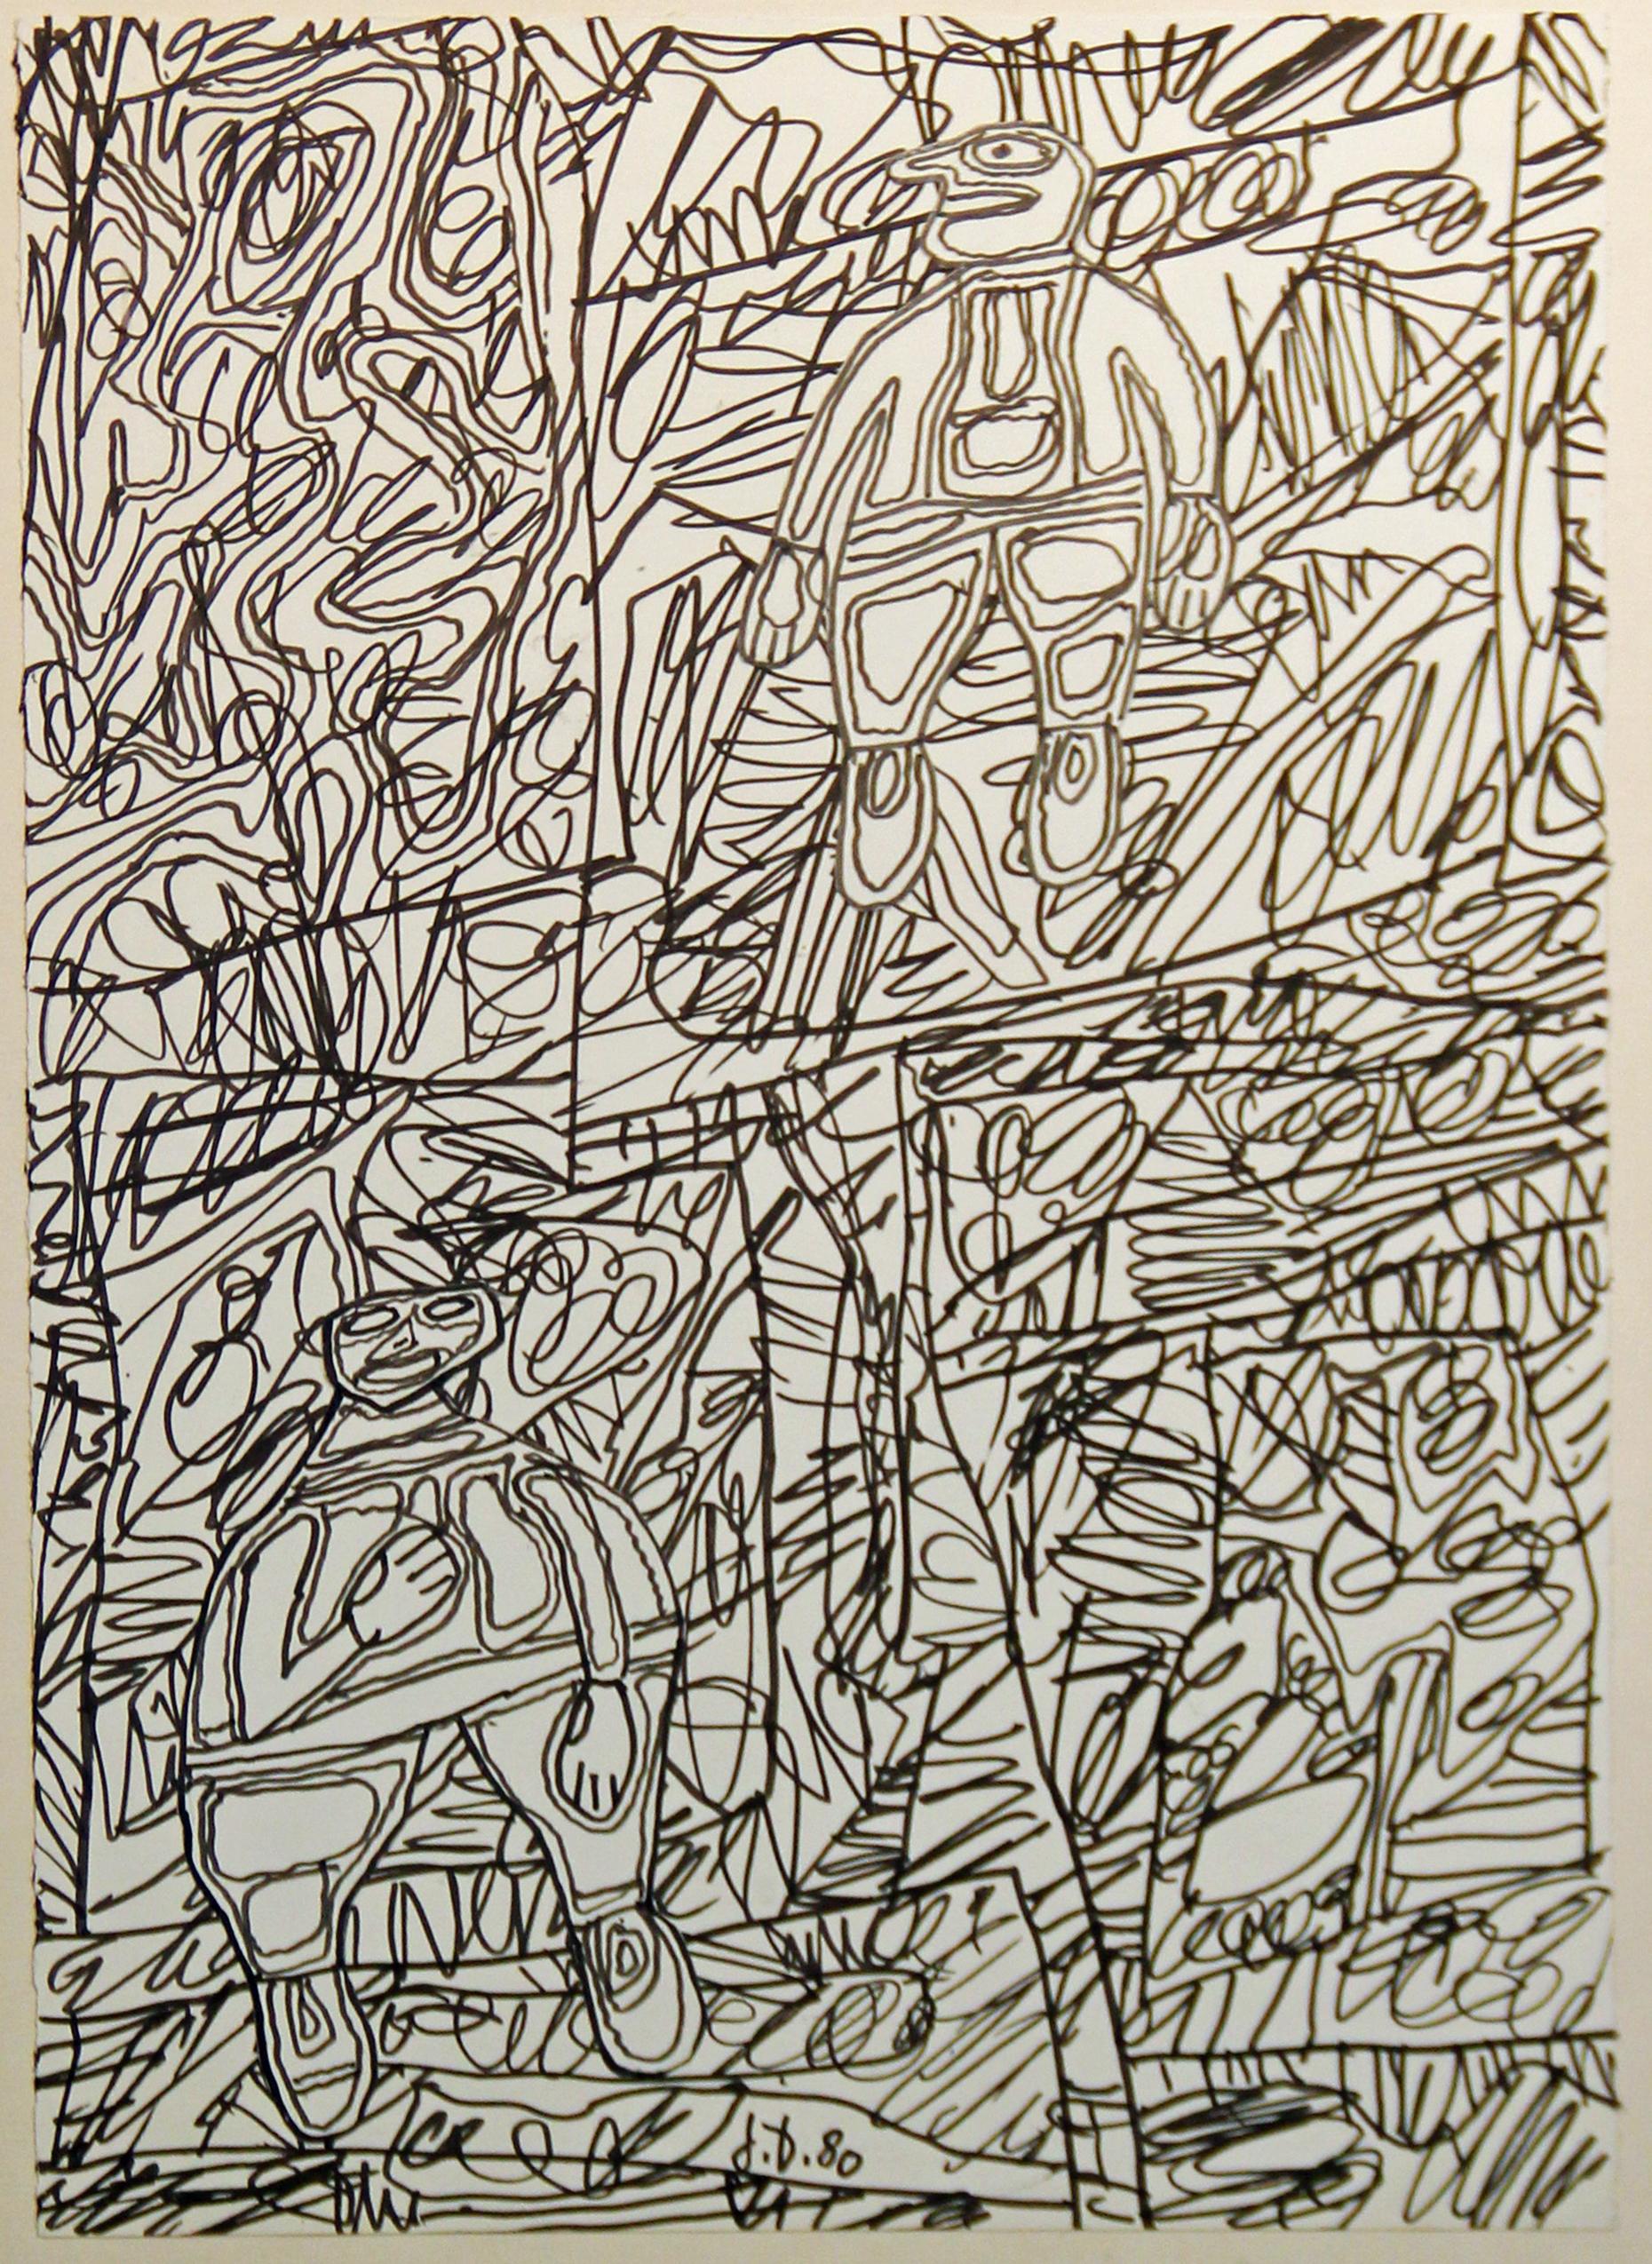 Jean DuBuffet, Site aux Figurines, Black Marker on Paper, Signed and Dated (Braun), Figurative Art, von Jean Dubuffet